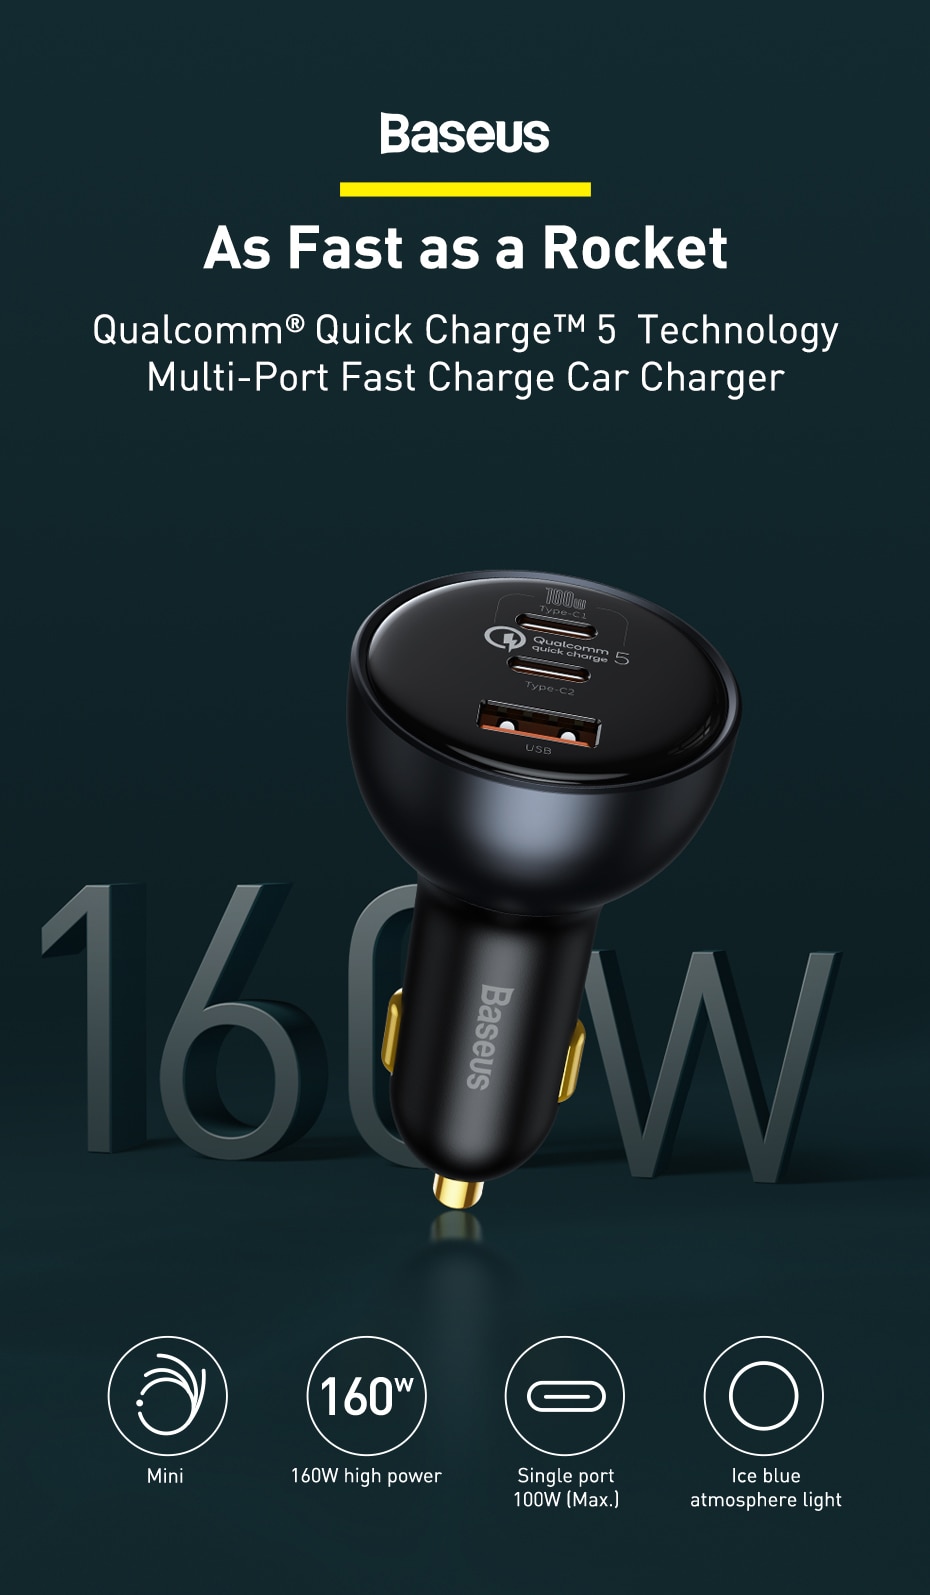 Baseus Online  Baseus 160W Car Charger Quick Charge QC 5.0 4.0 3.0 PD  Charger For Macbook iPad Pro Laptop USB Type C Charger For iPhone Xiaomi